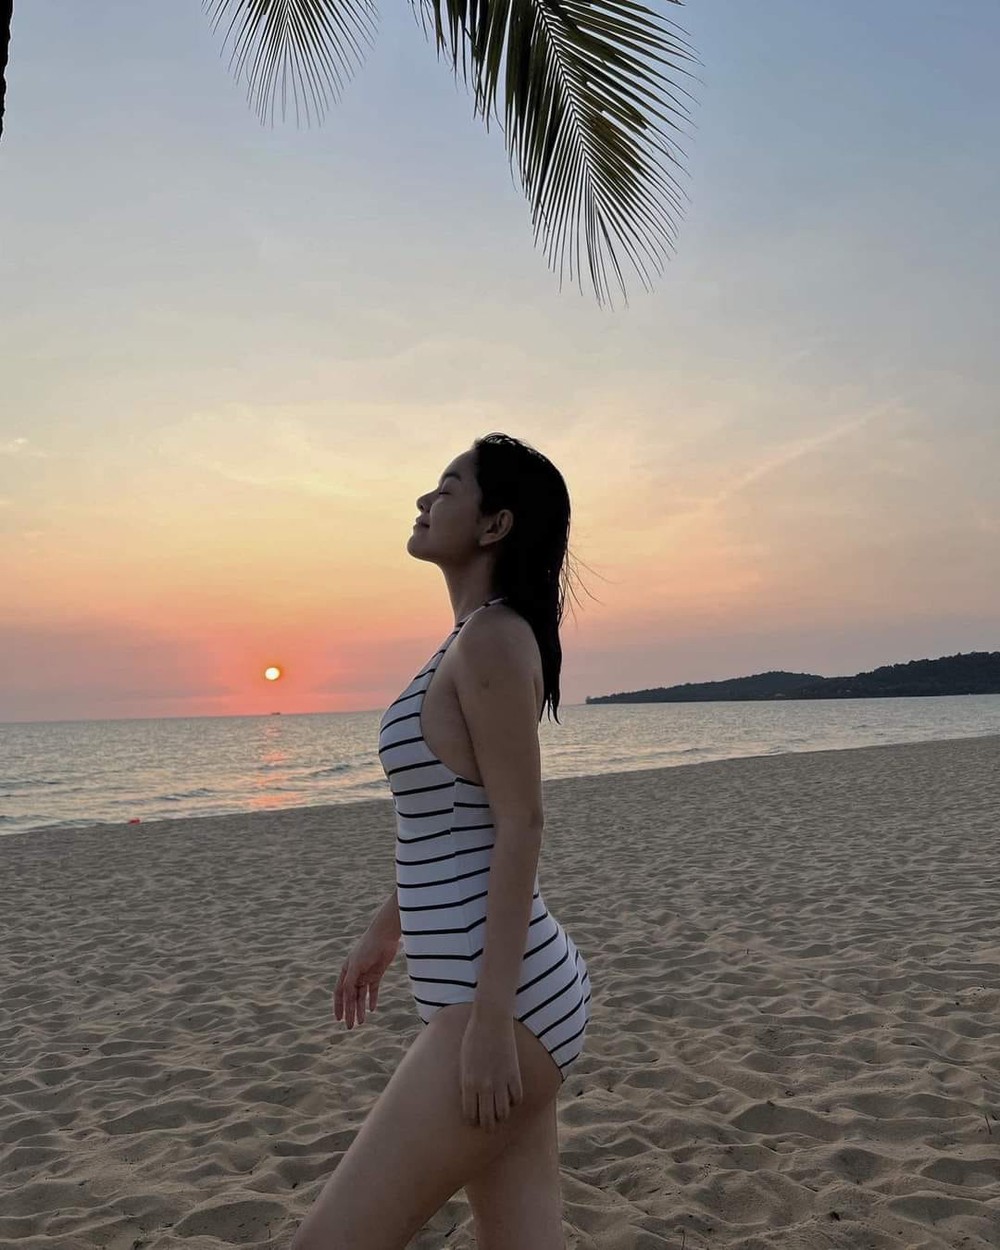 Pham Quynh Anh released bikini photos, showing off her body after pregnancy rumors - Photo 3.